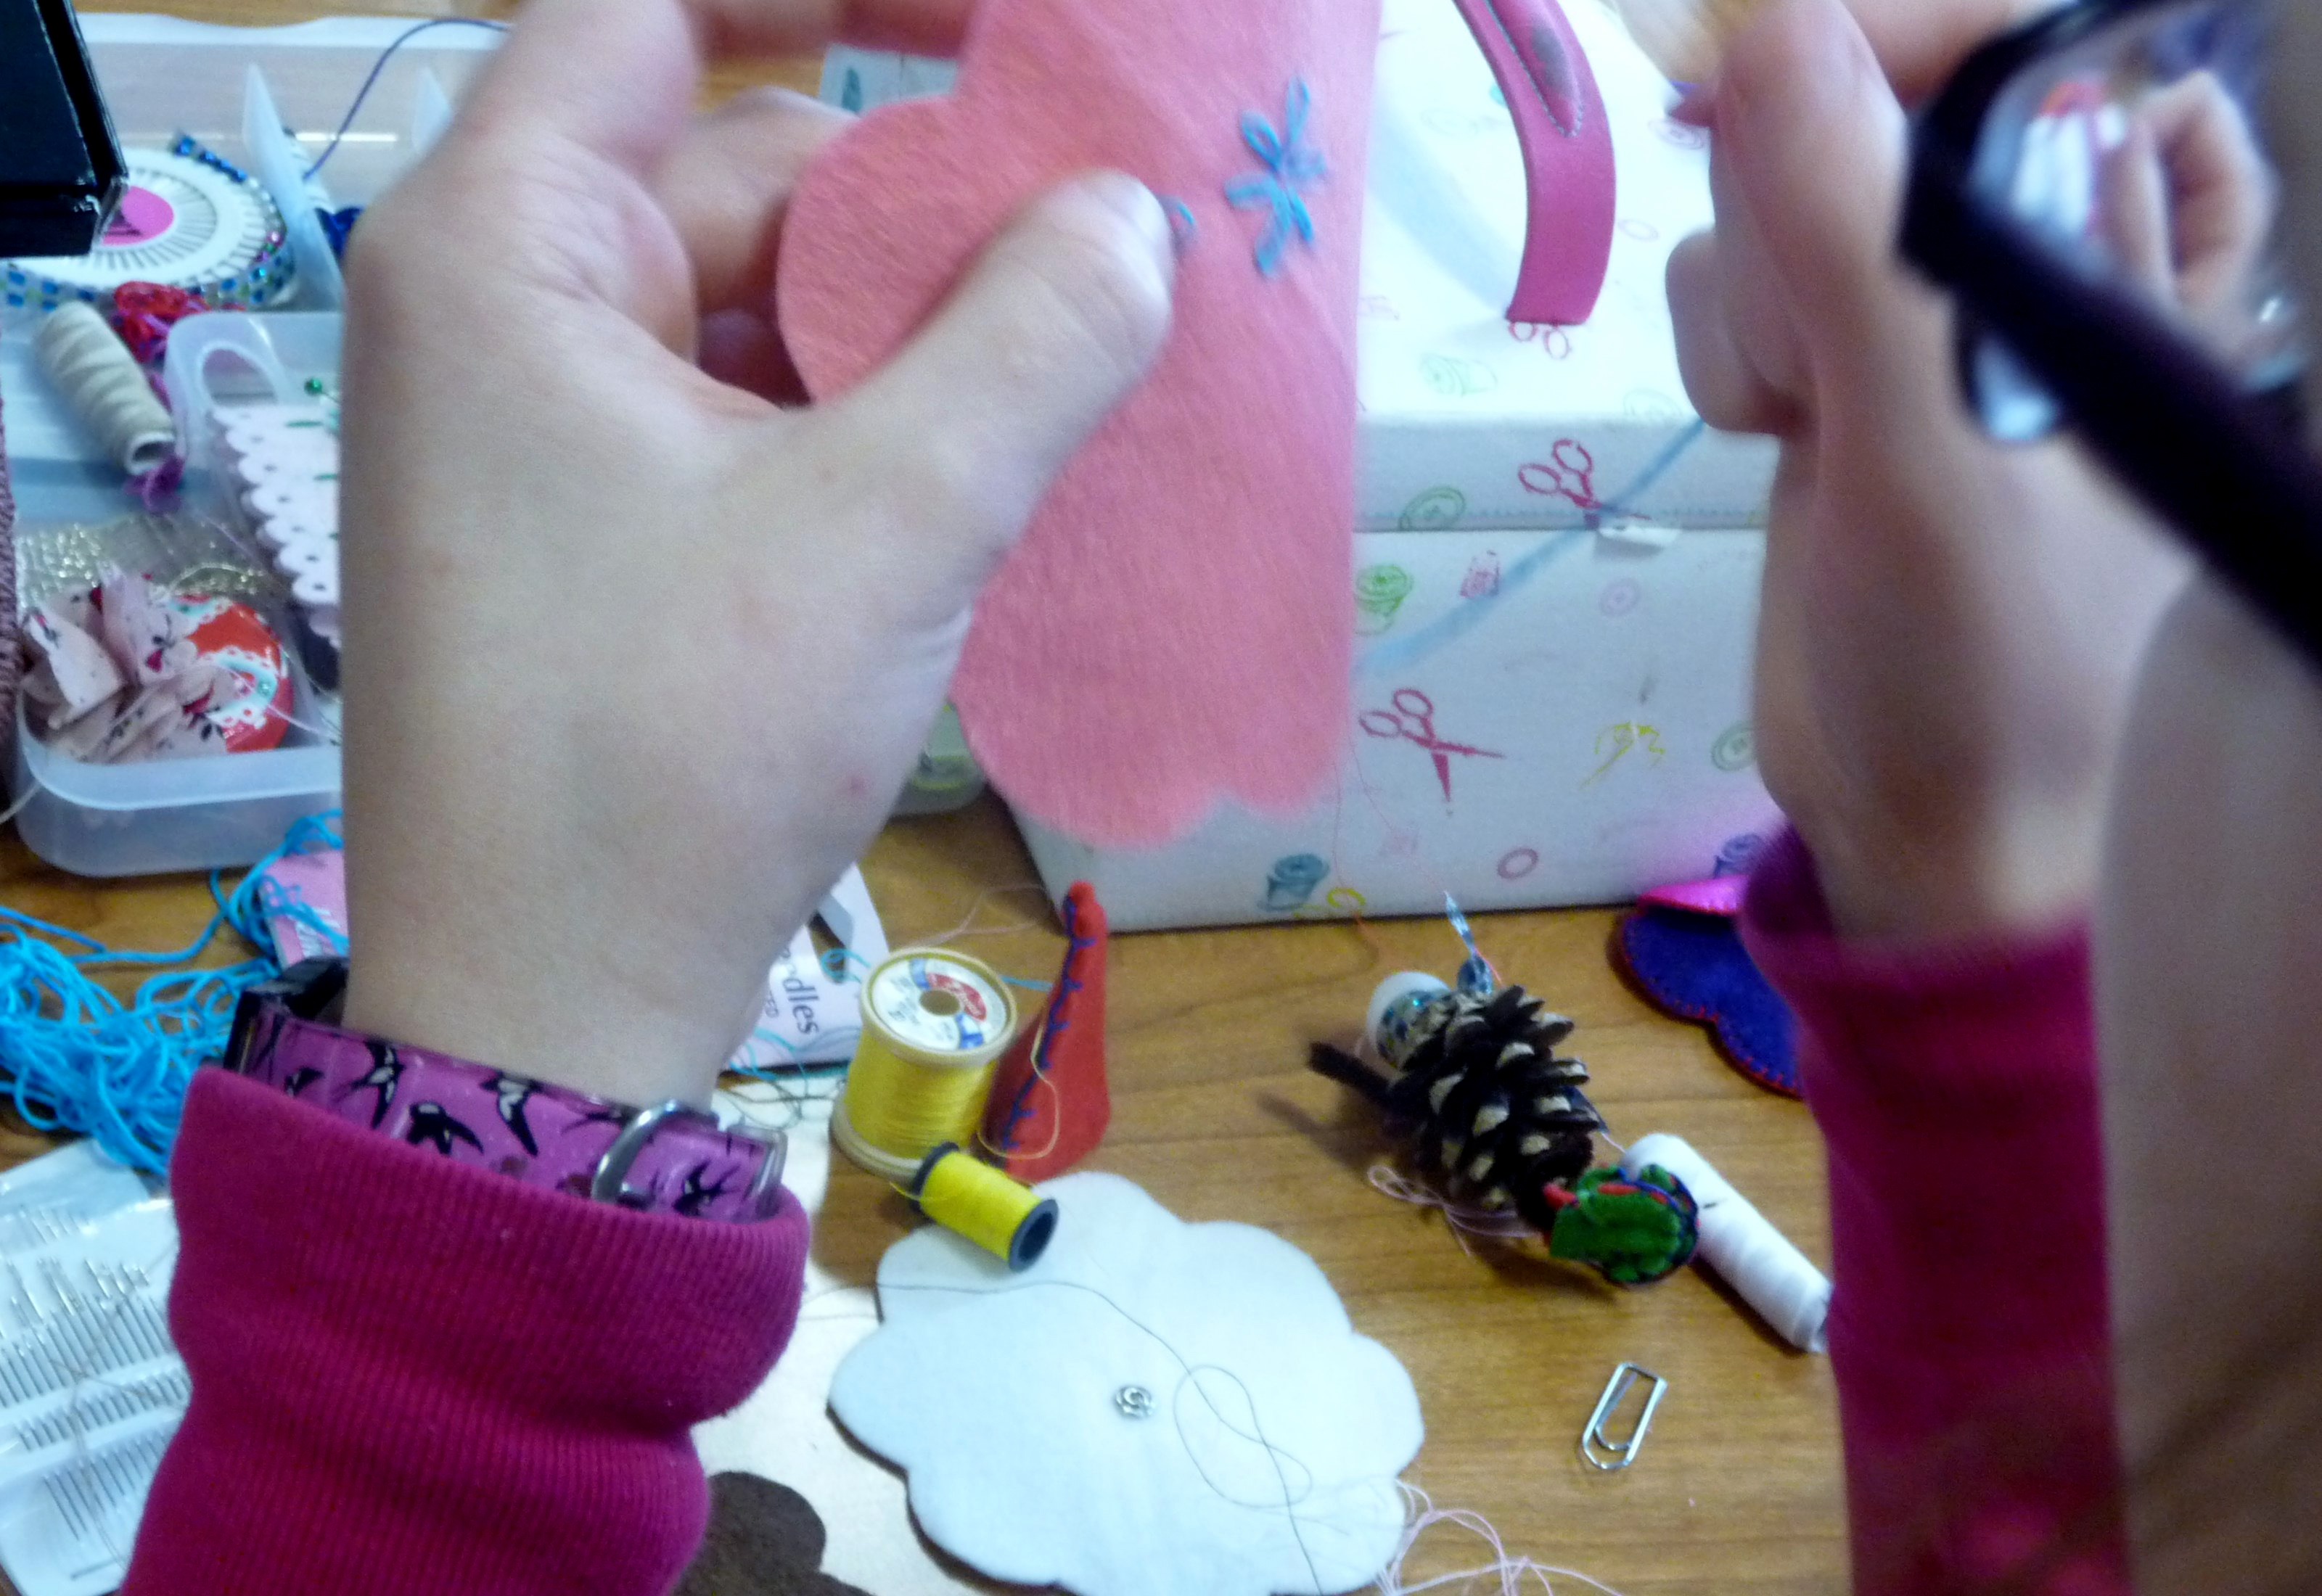 YE group are making embroidered purses for Mothers Day